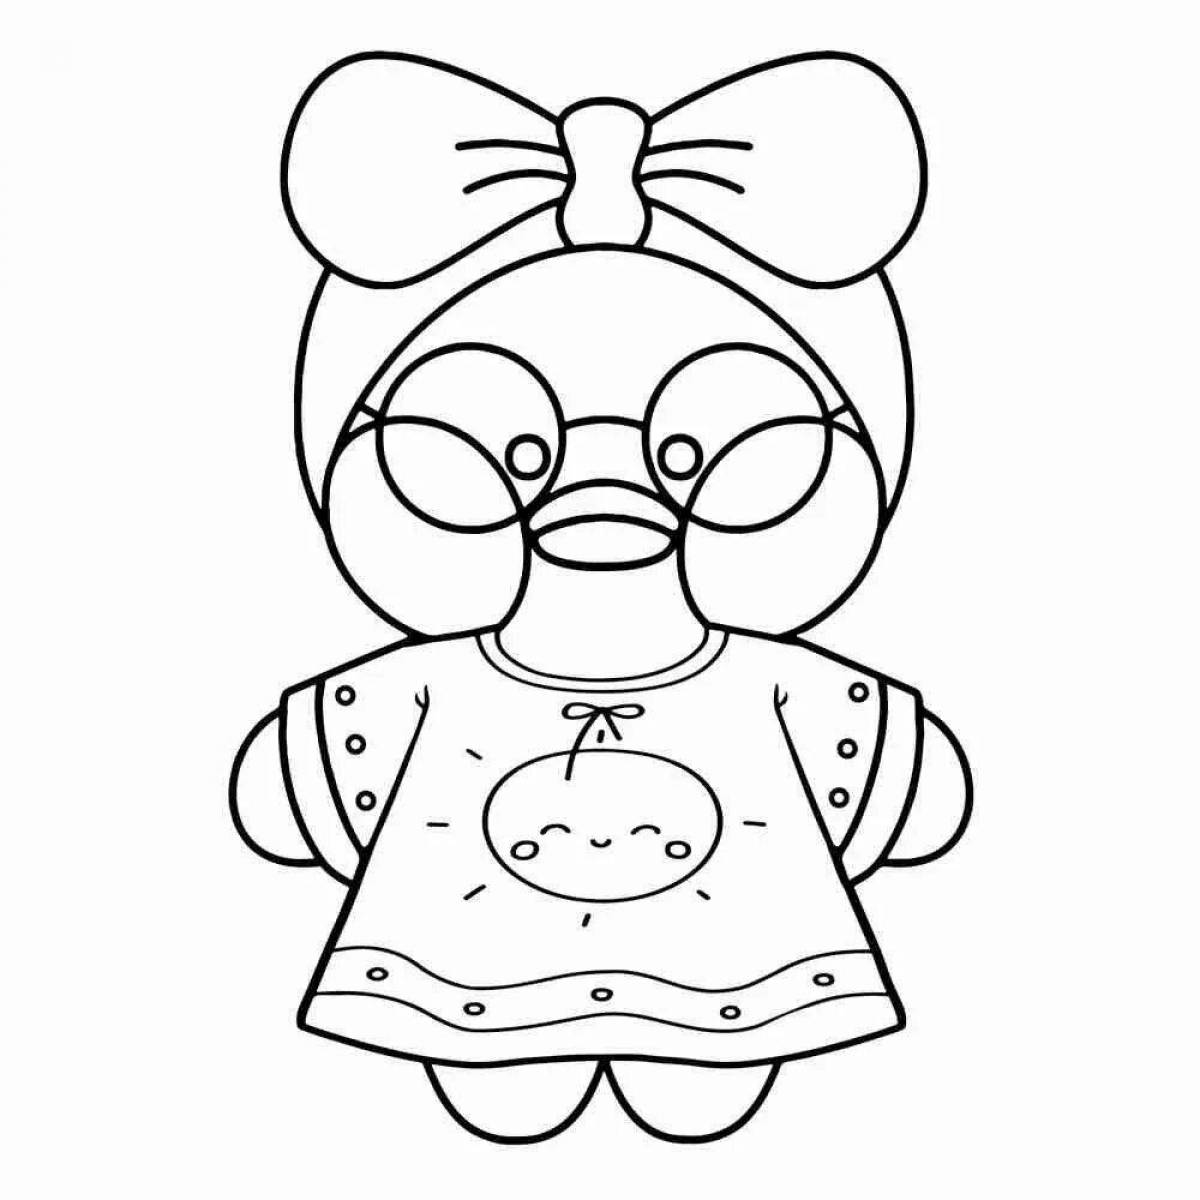 Color-explosion coloring page утка лалафан с одеждой